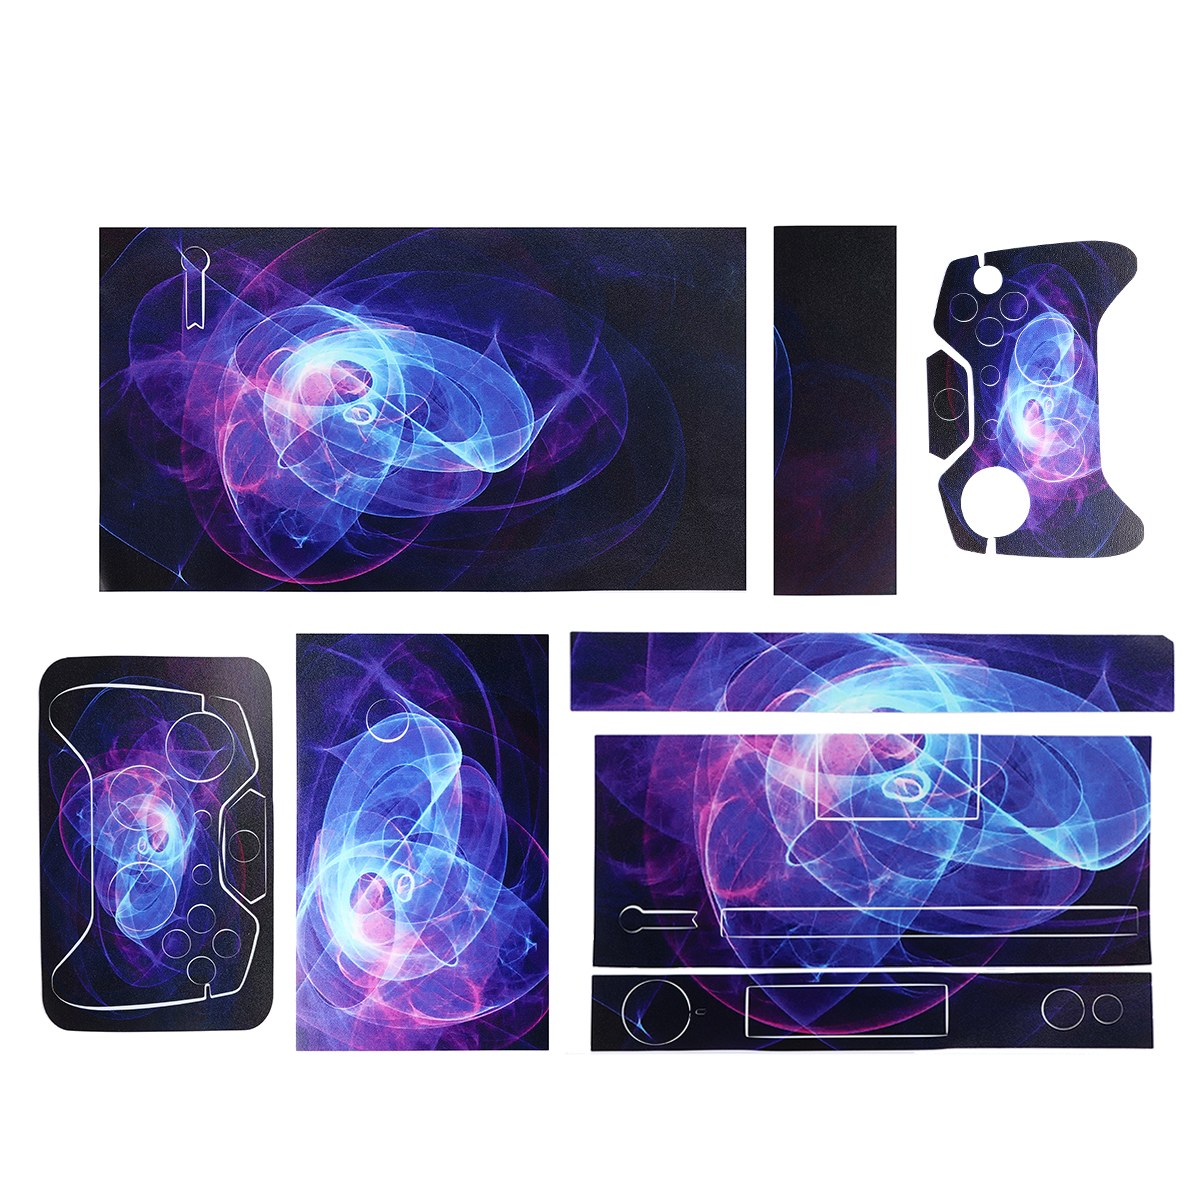 Purple Protective Vinyl Decal Skin Stickers Wrap Cover For Xbox One Game Console Game Controller Kinect 50